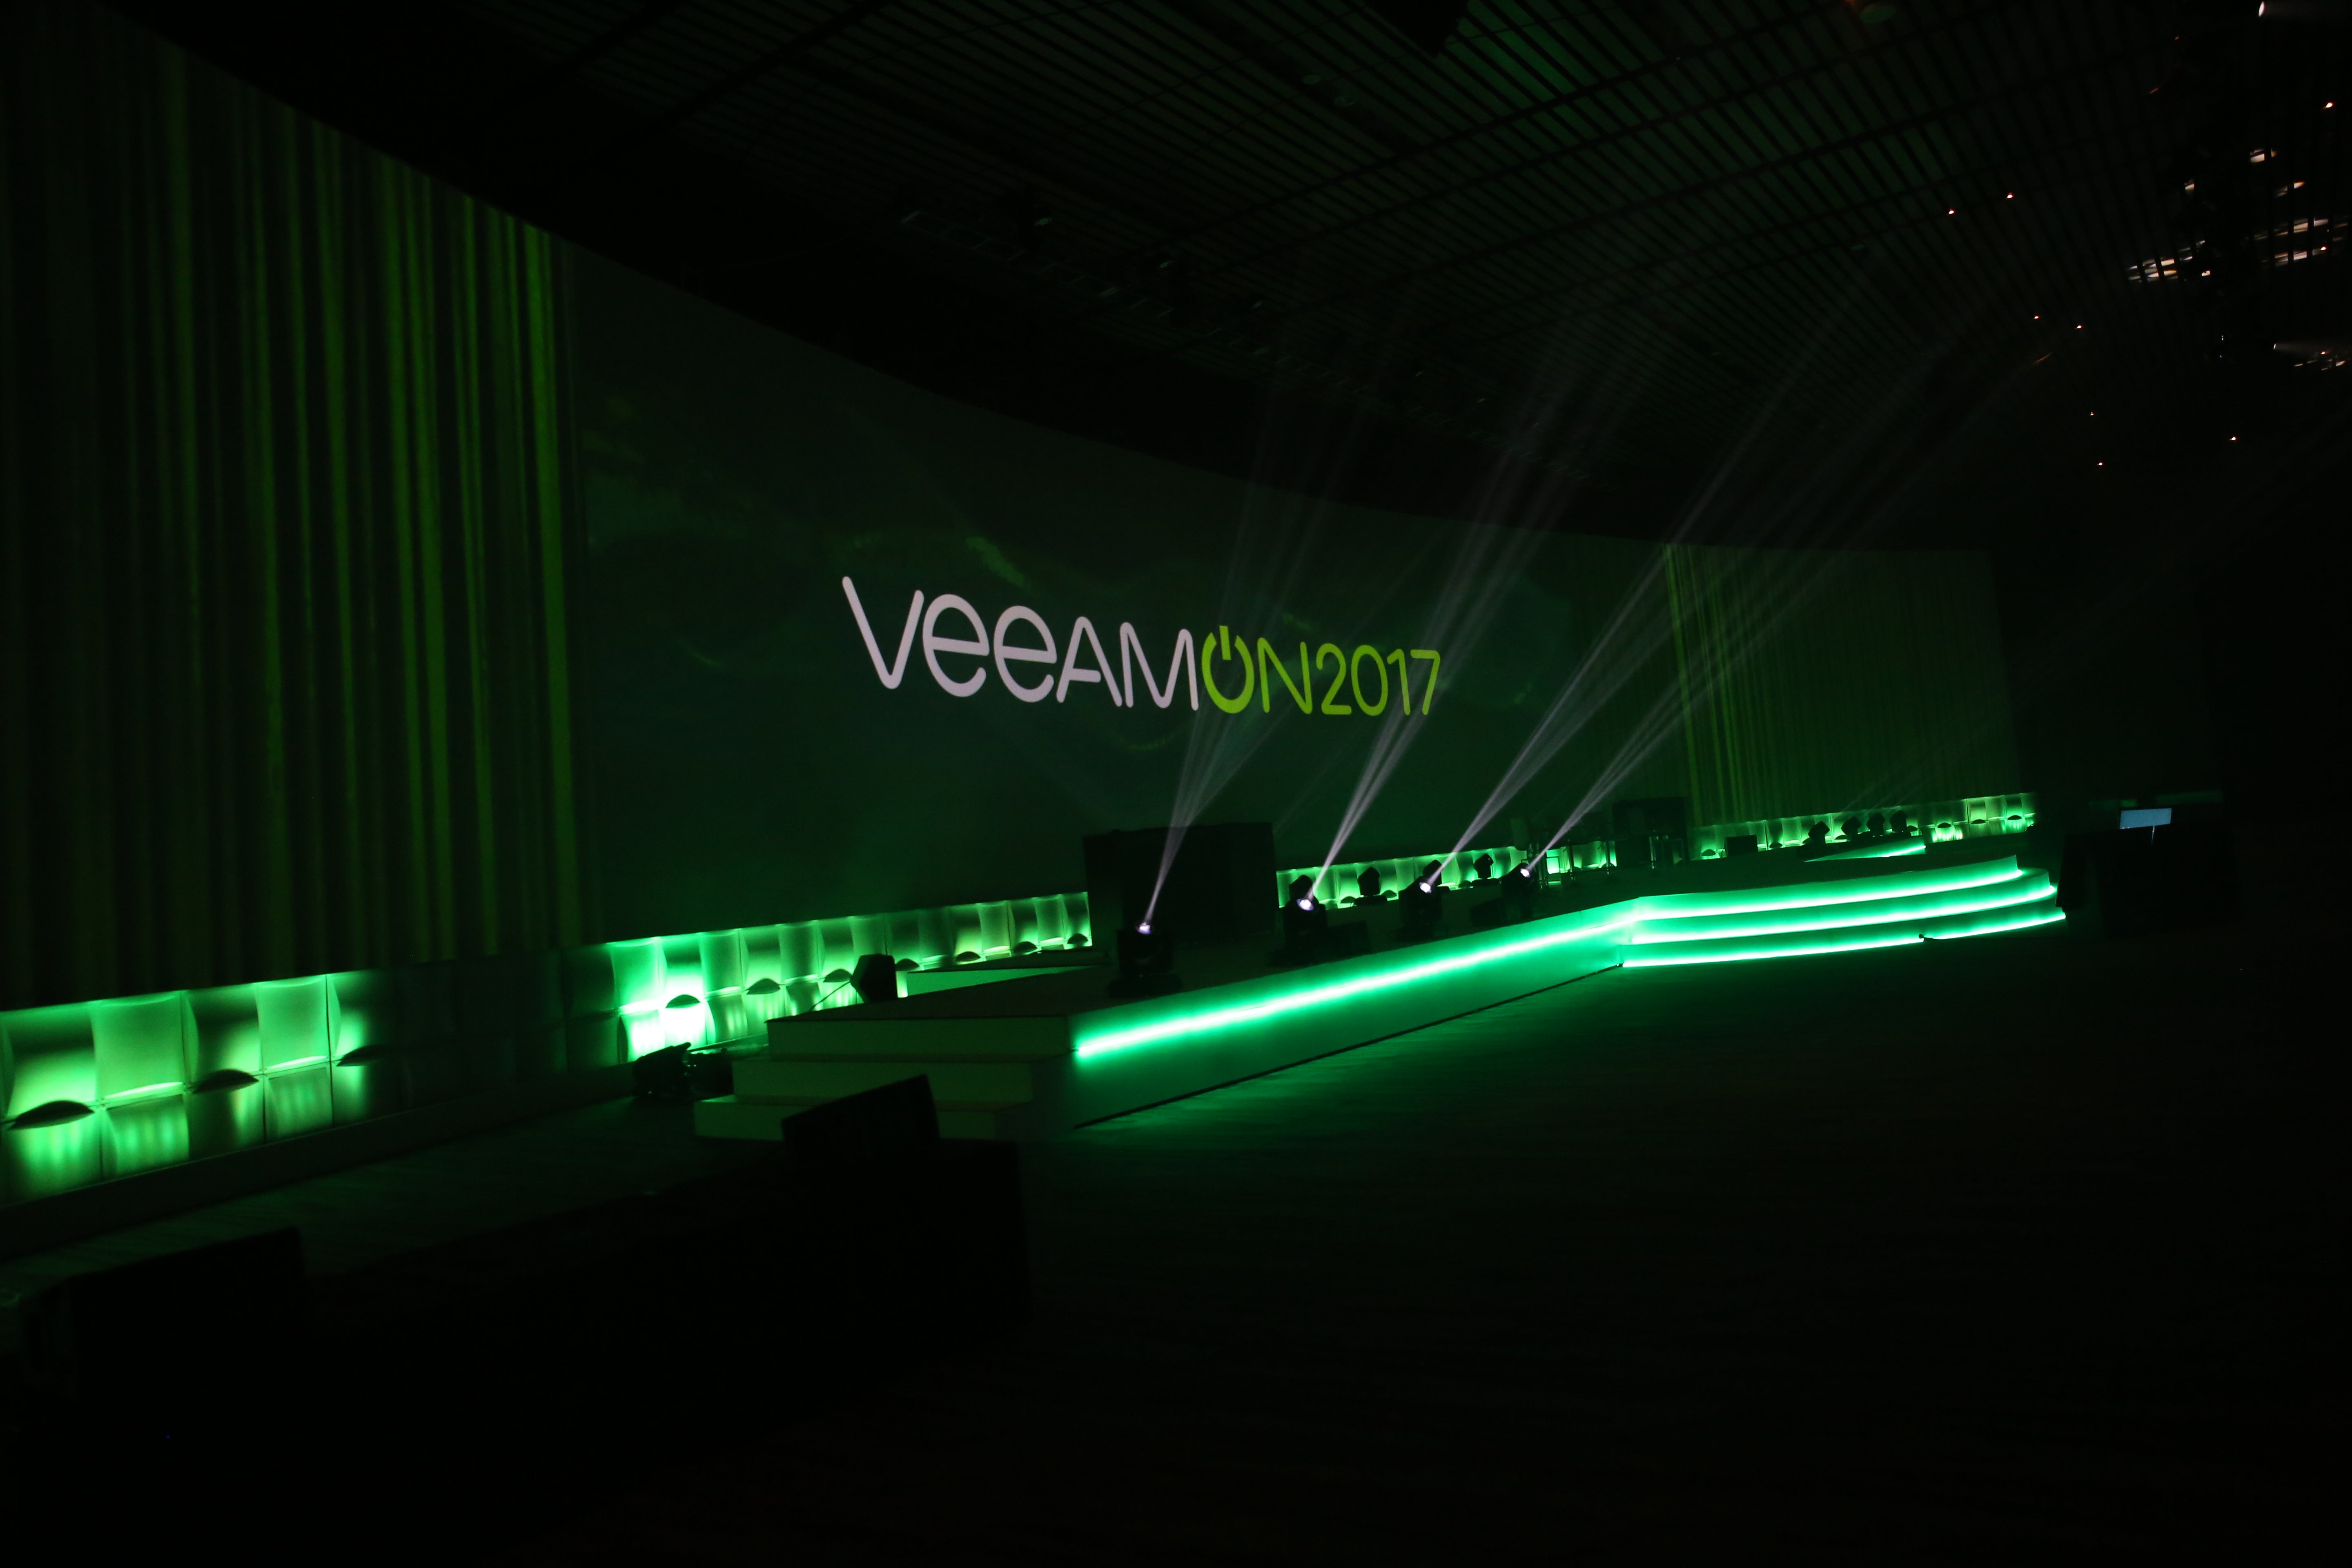 How Veeam is targeting a seamless digital life experience